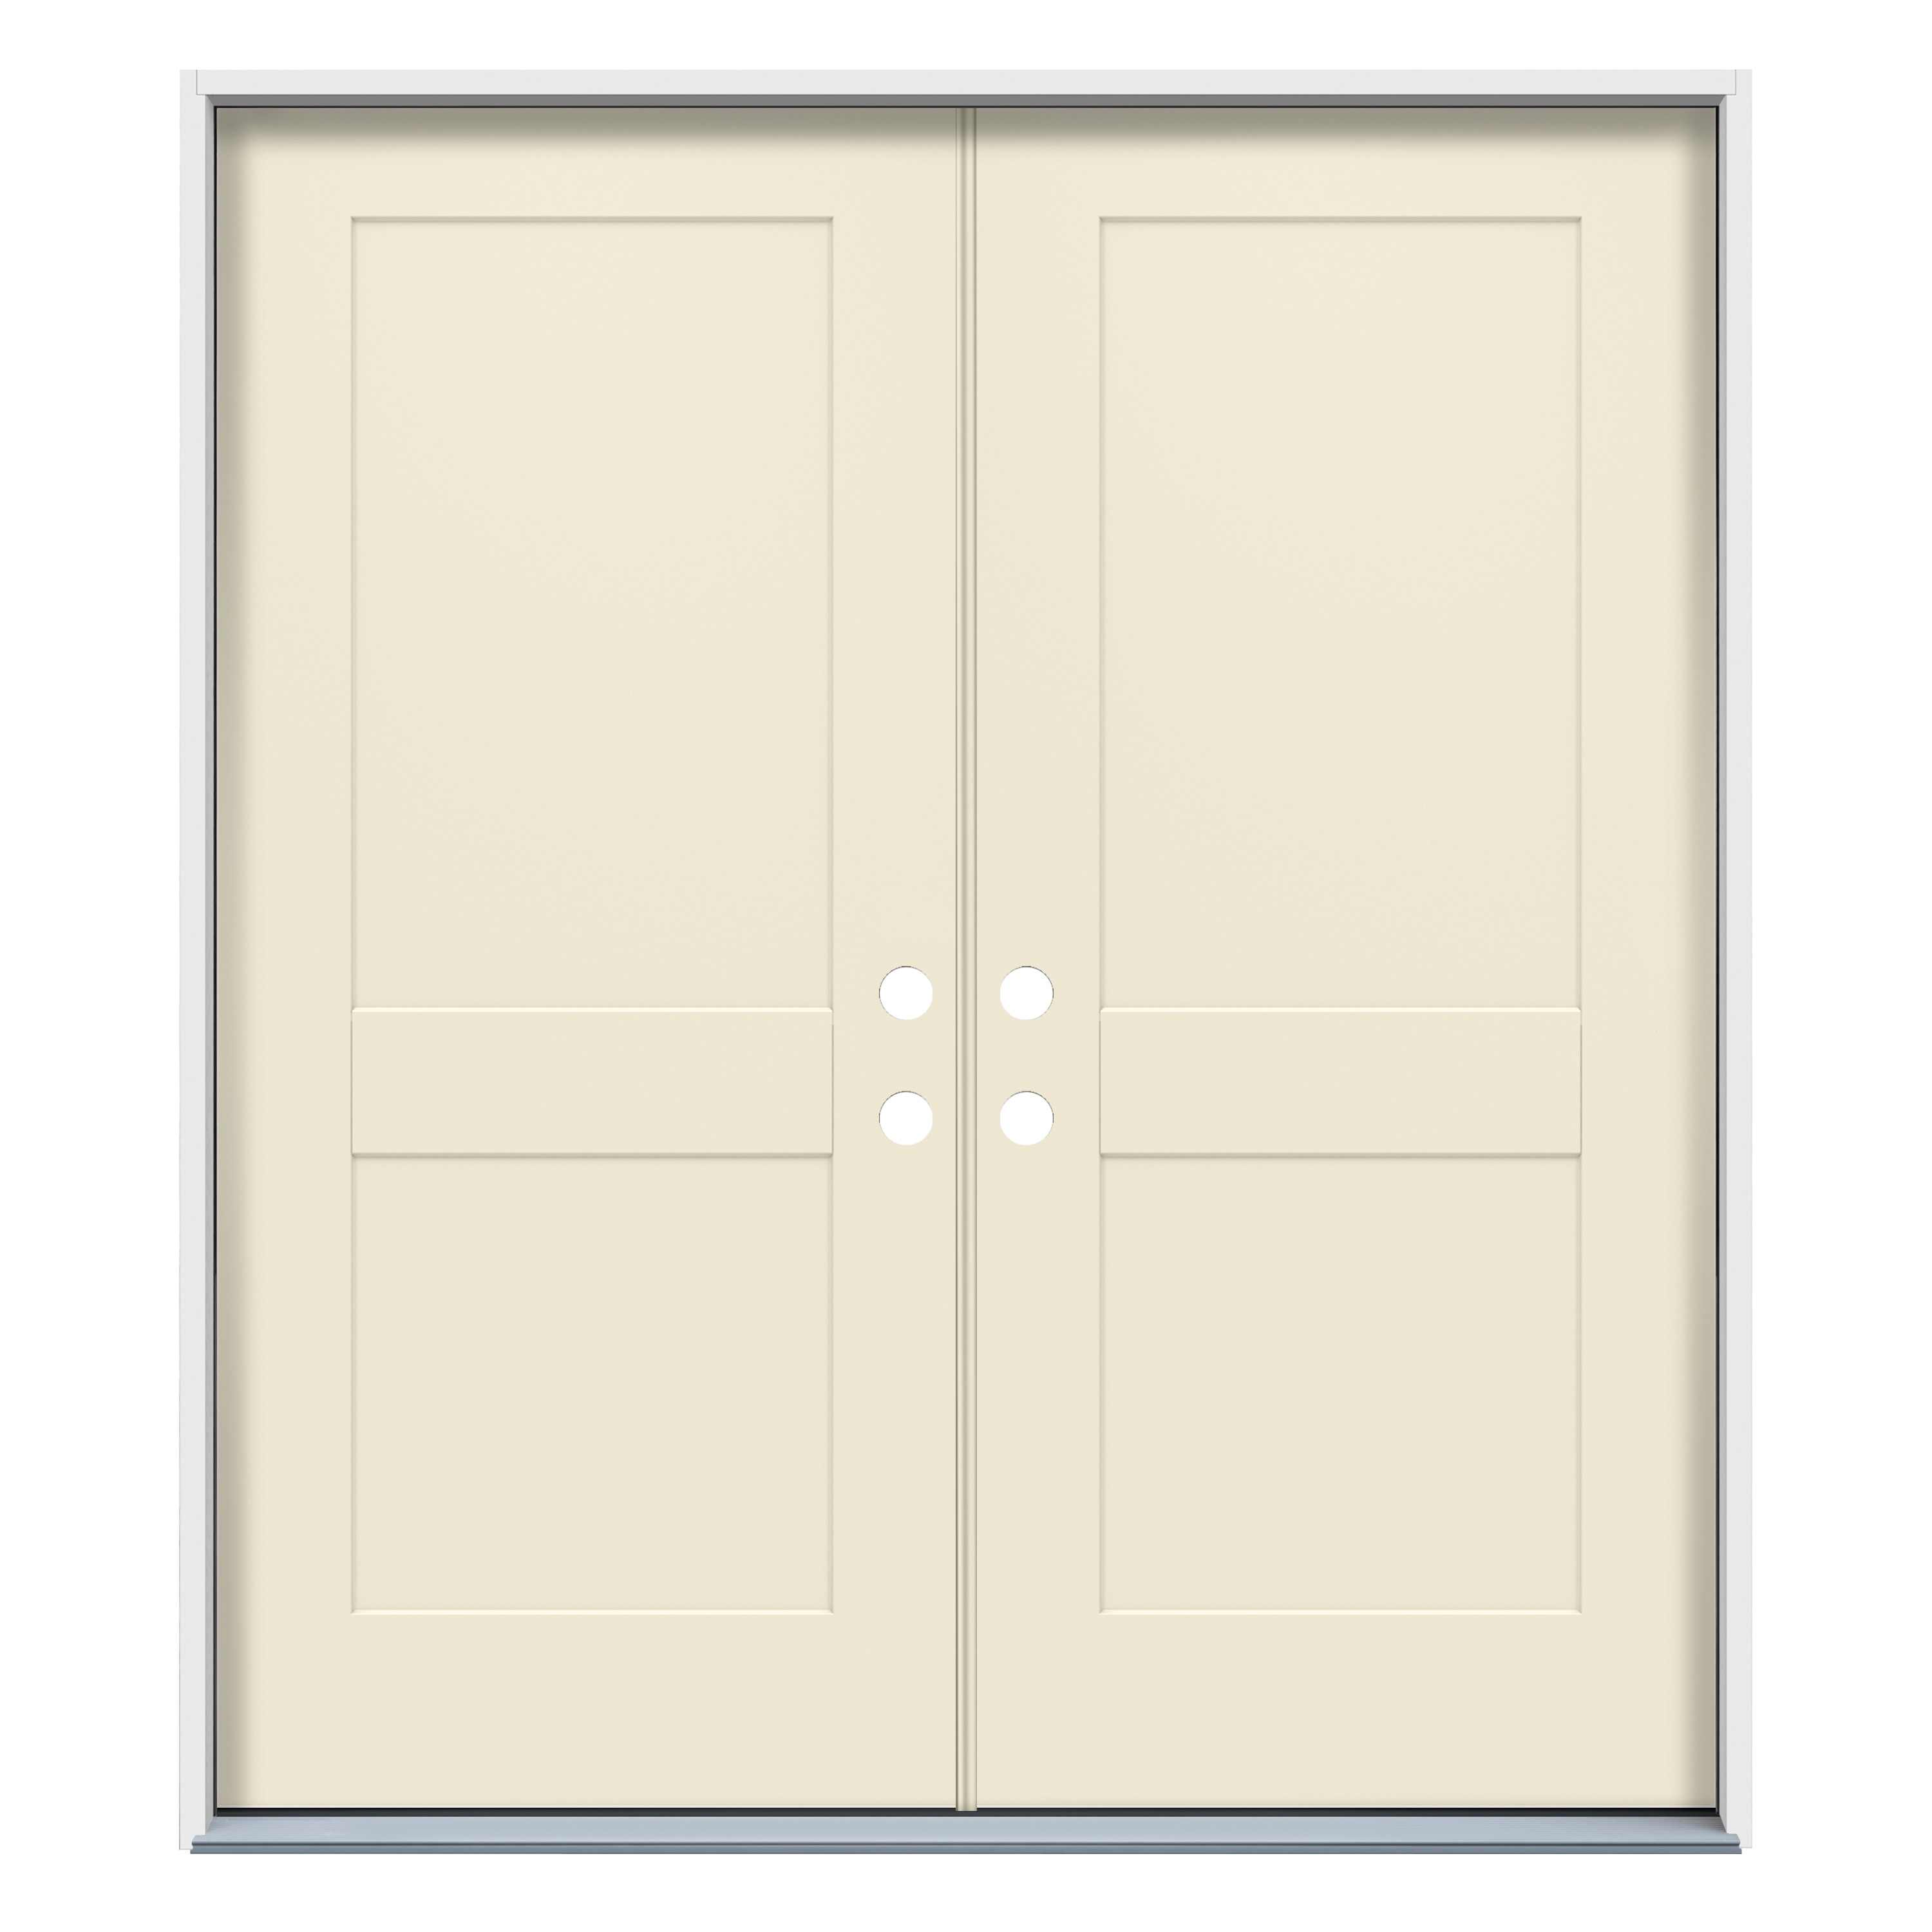 American Building Supply 72-in x 80-in Steel Right-Hand Inswing Bisque Paint Painted Prehung Double Front Door Insulating Core in Off-White -  LO1049634